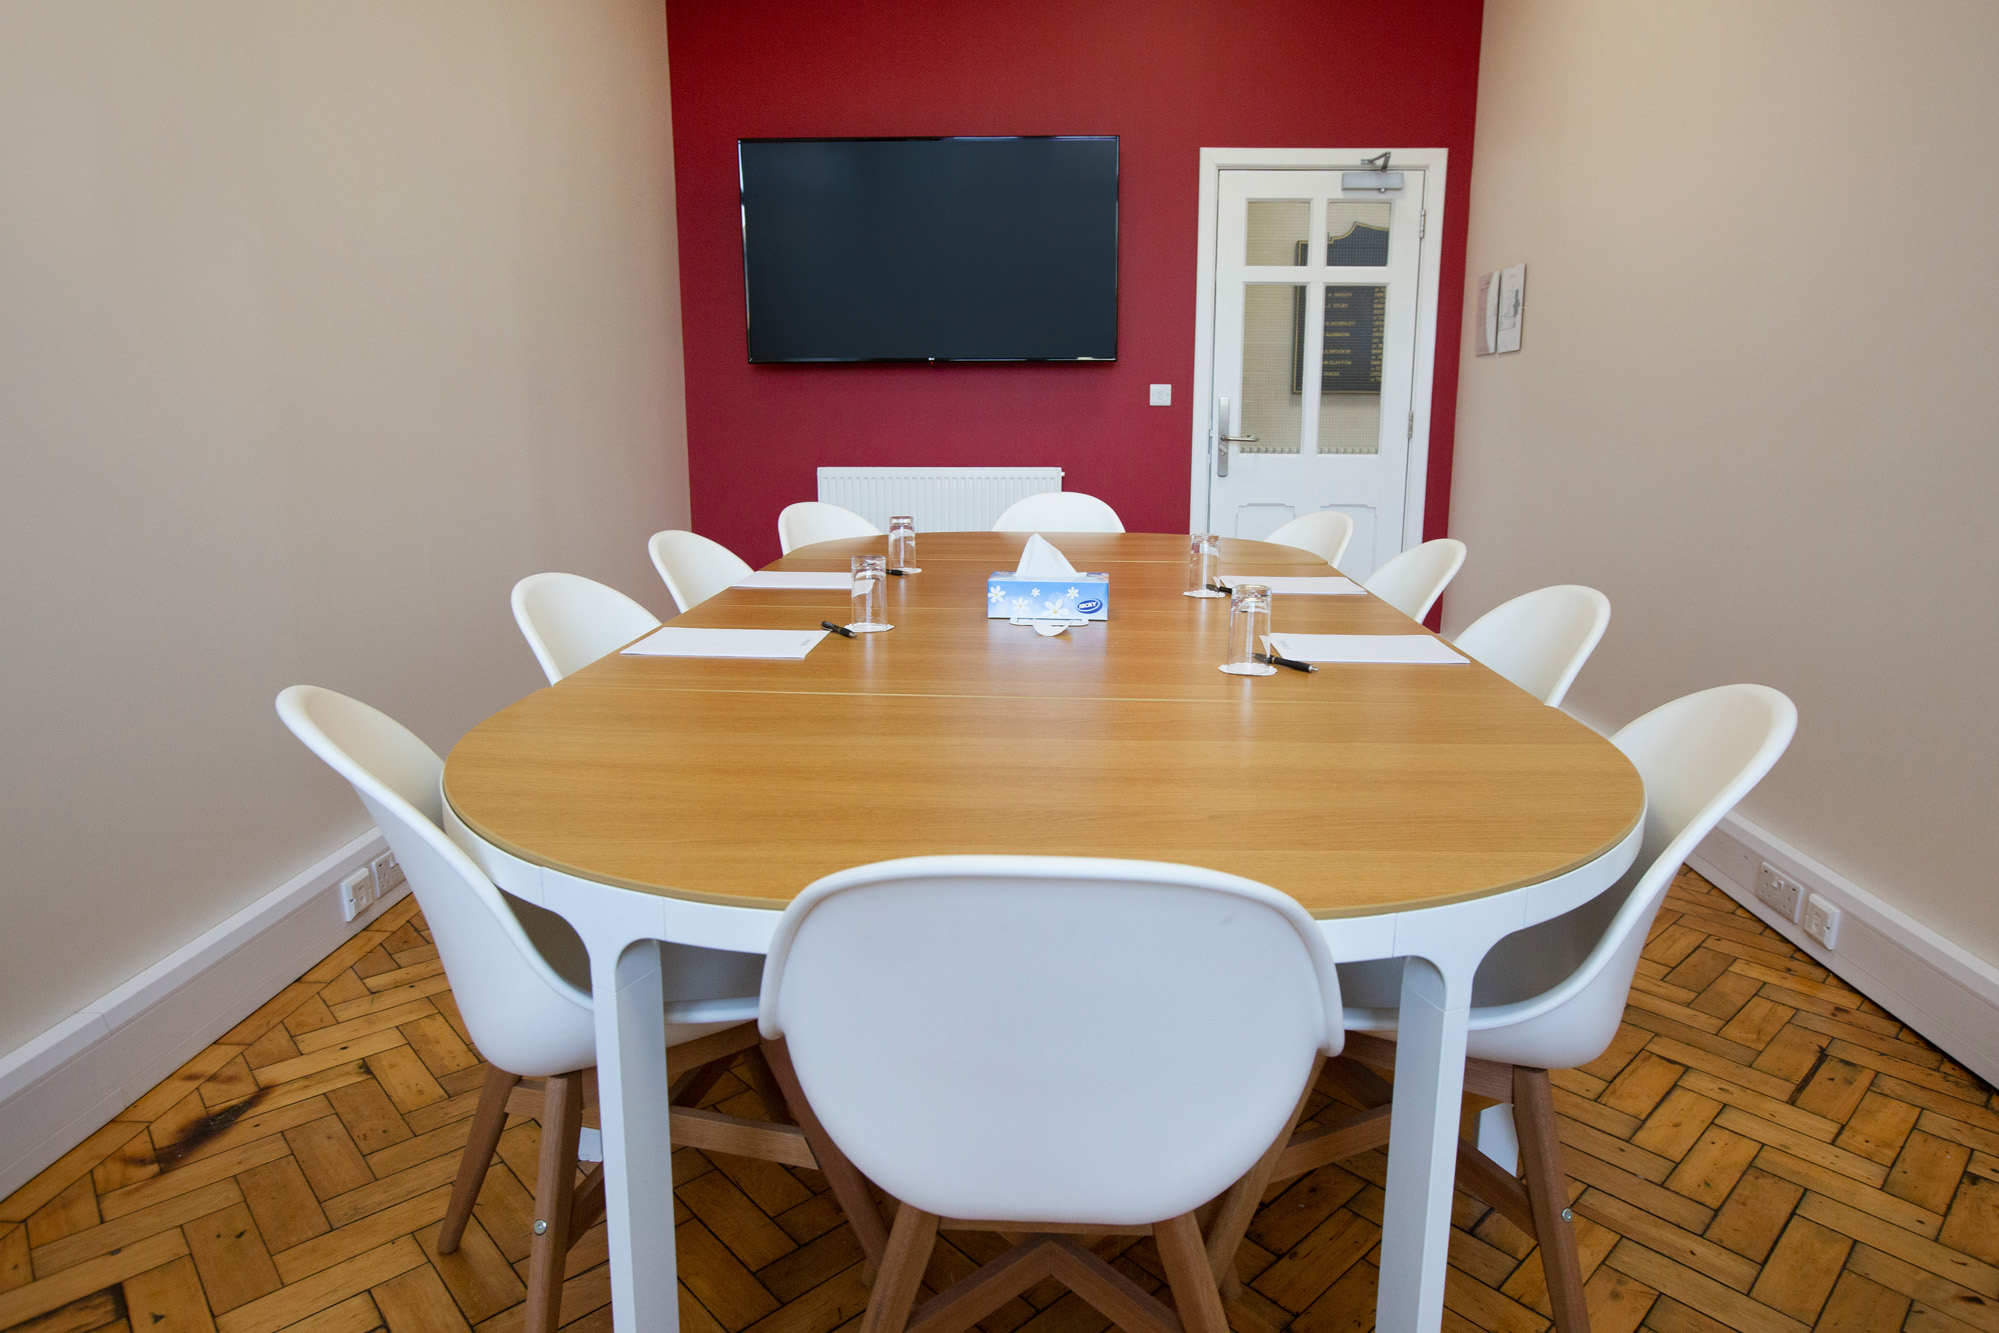 Generate your businesses next big idea with our special boardroom hire summer discount deal!